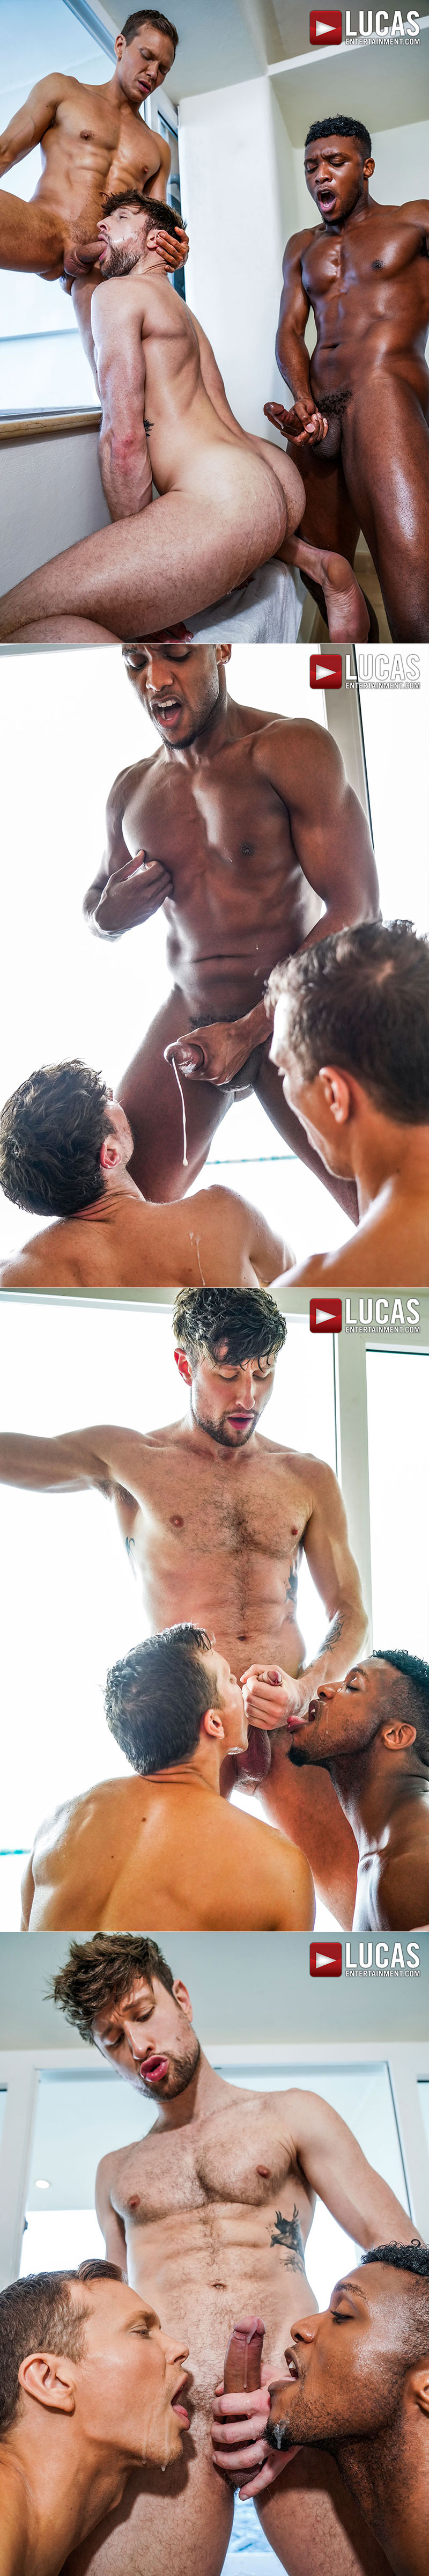 Lucas Entertainment: Andre Donovan, Ethan Chase and Drew Dixon's raw threeway in "Bust a Nut"